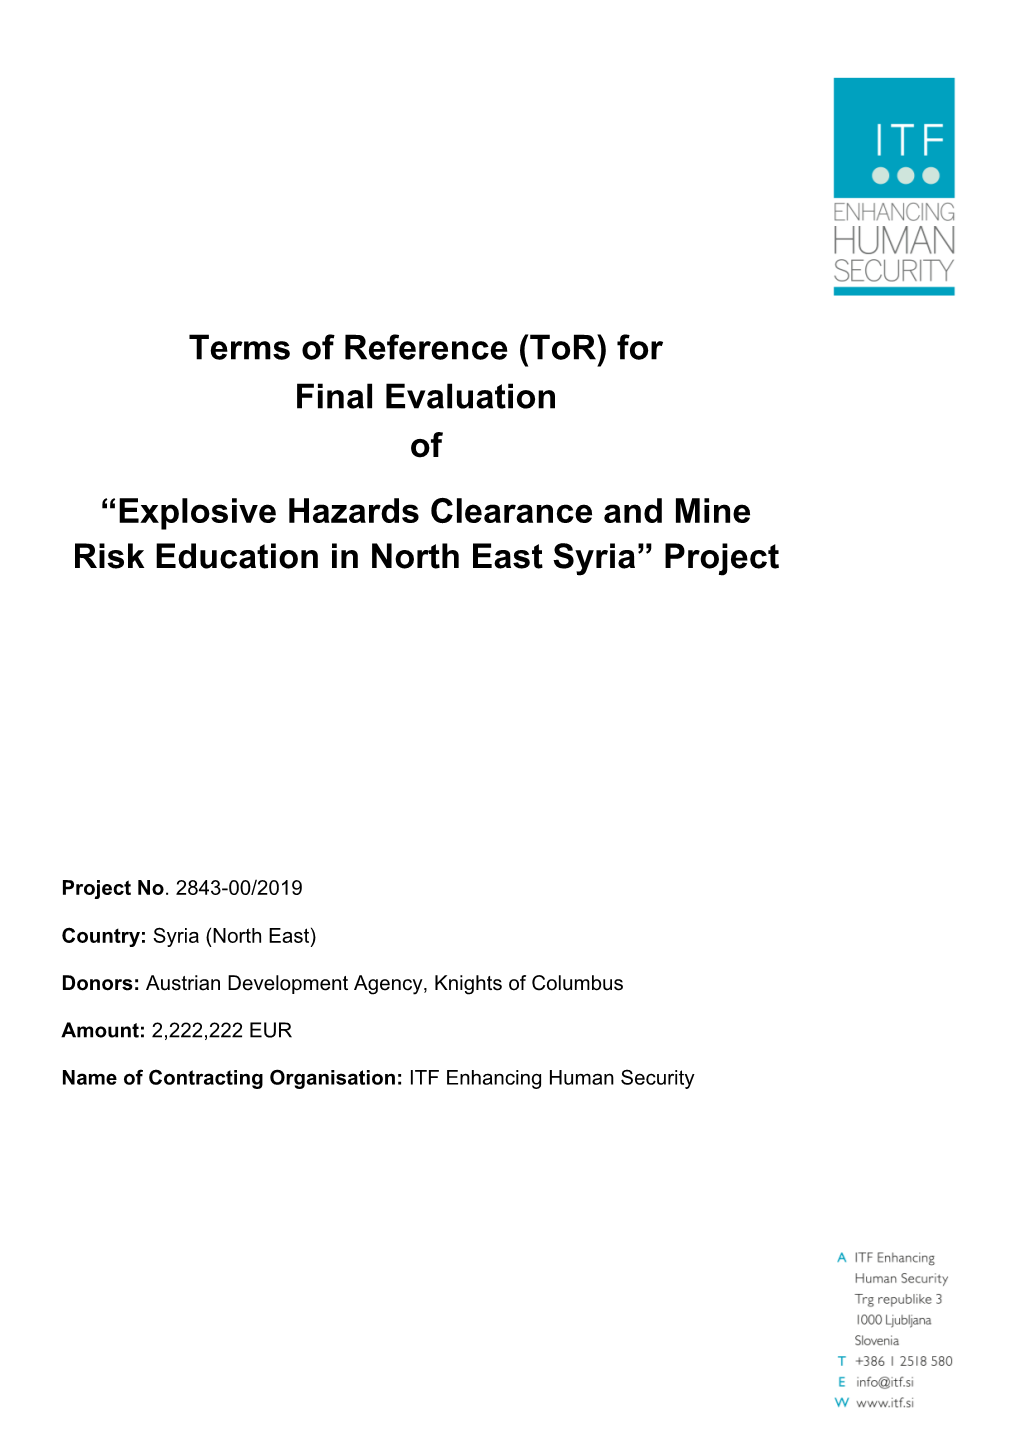 For Final Evaluation of “Explosive Hazards Clearance and Mine Risk Education in North East Syria” Project